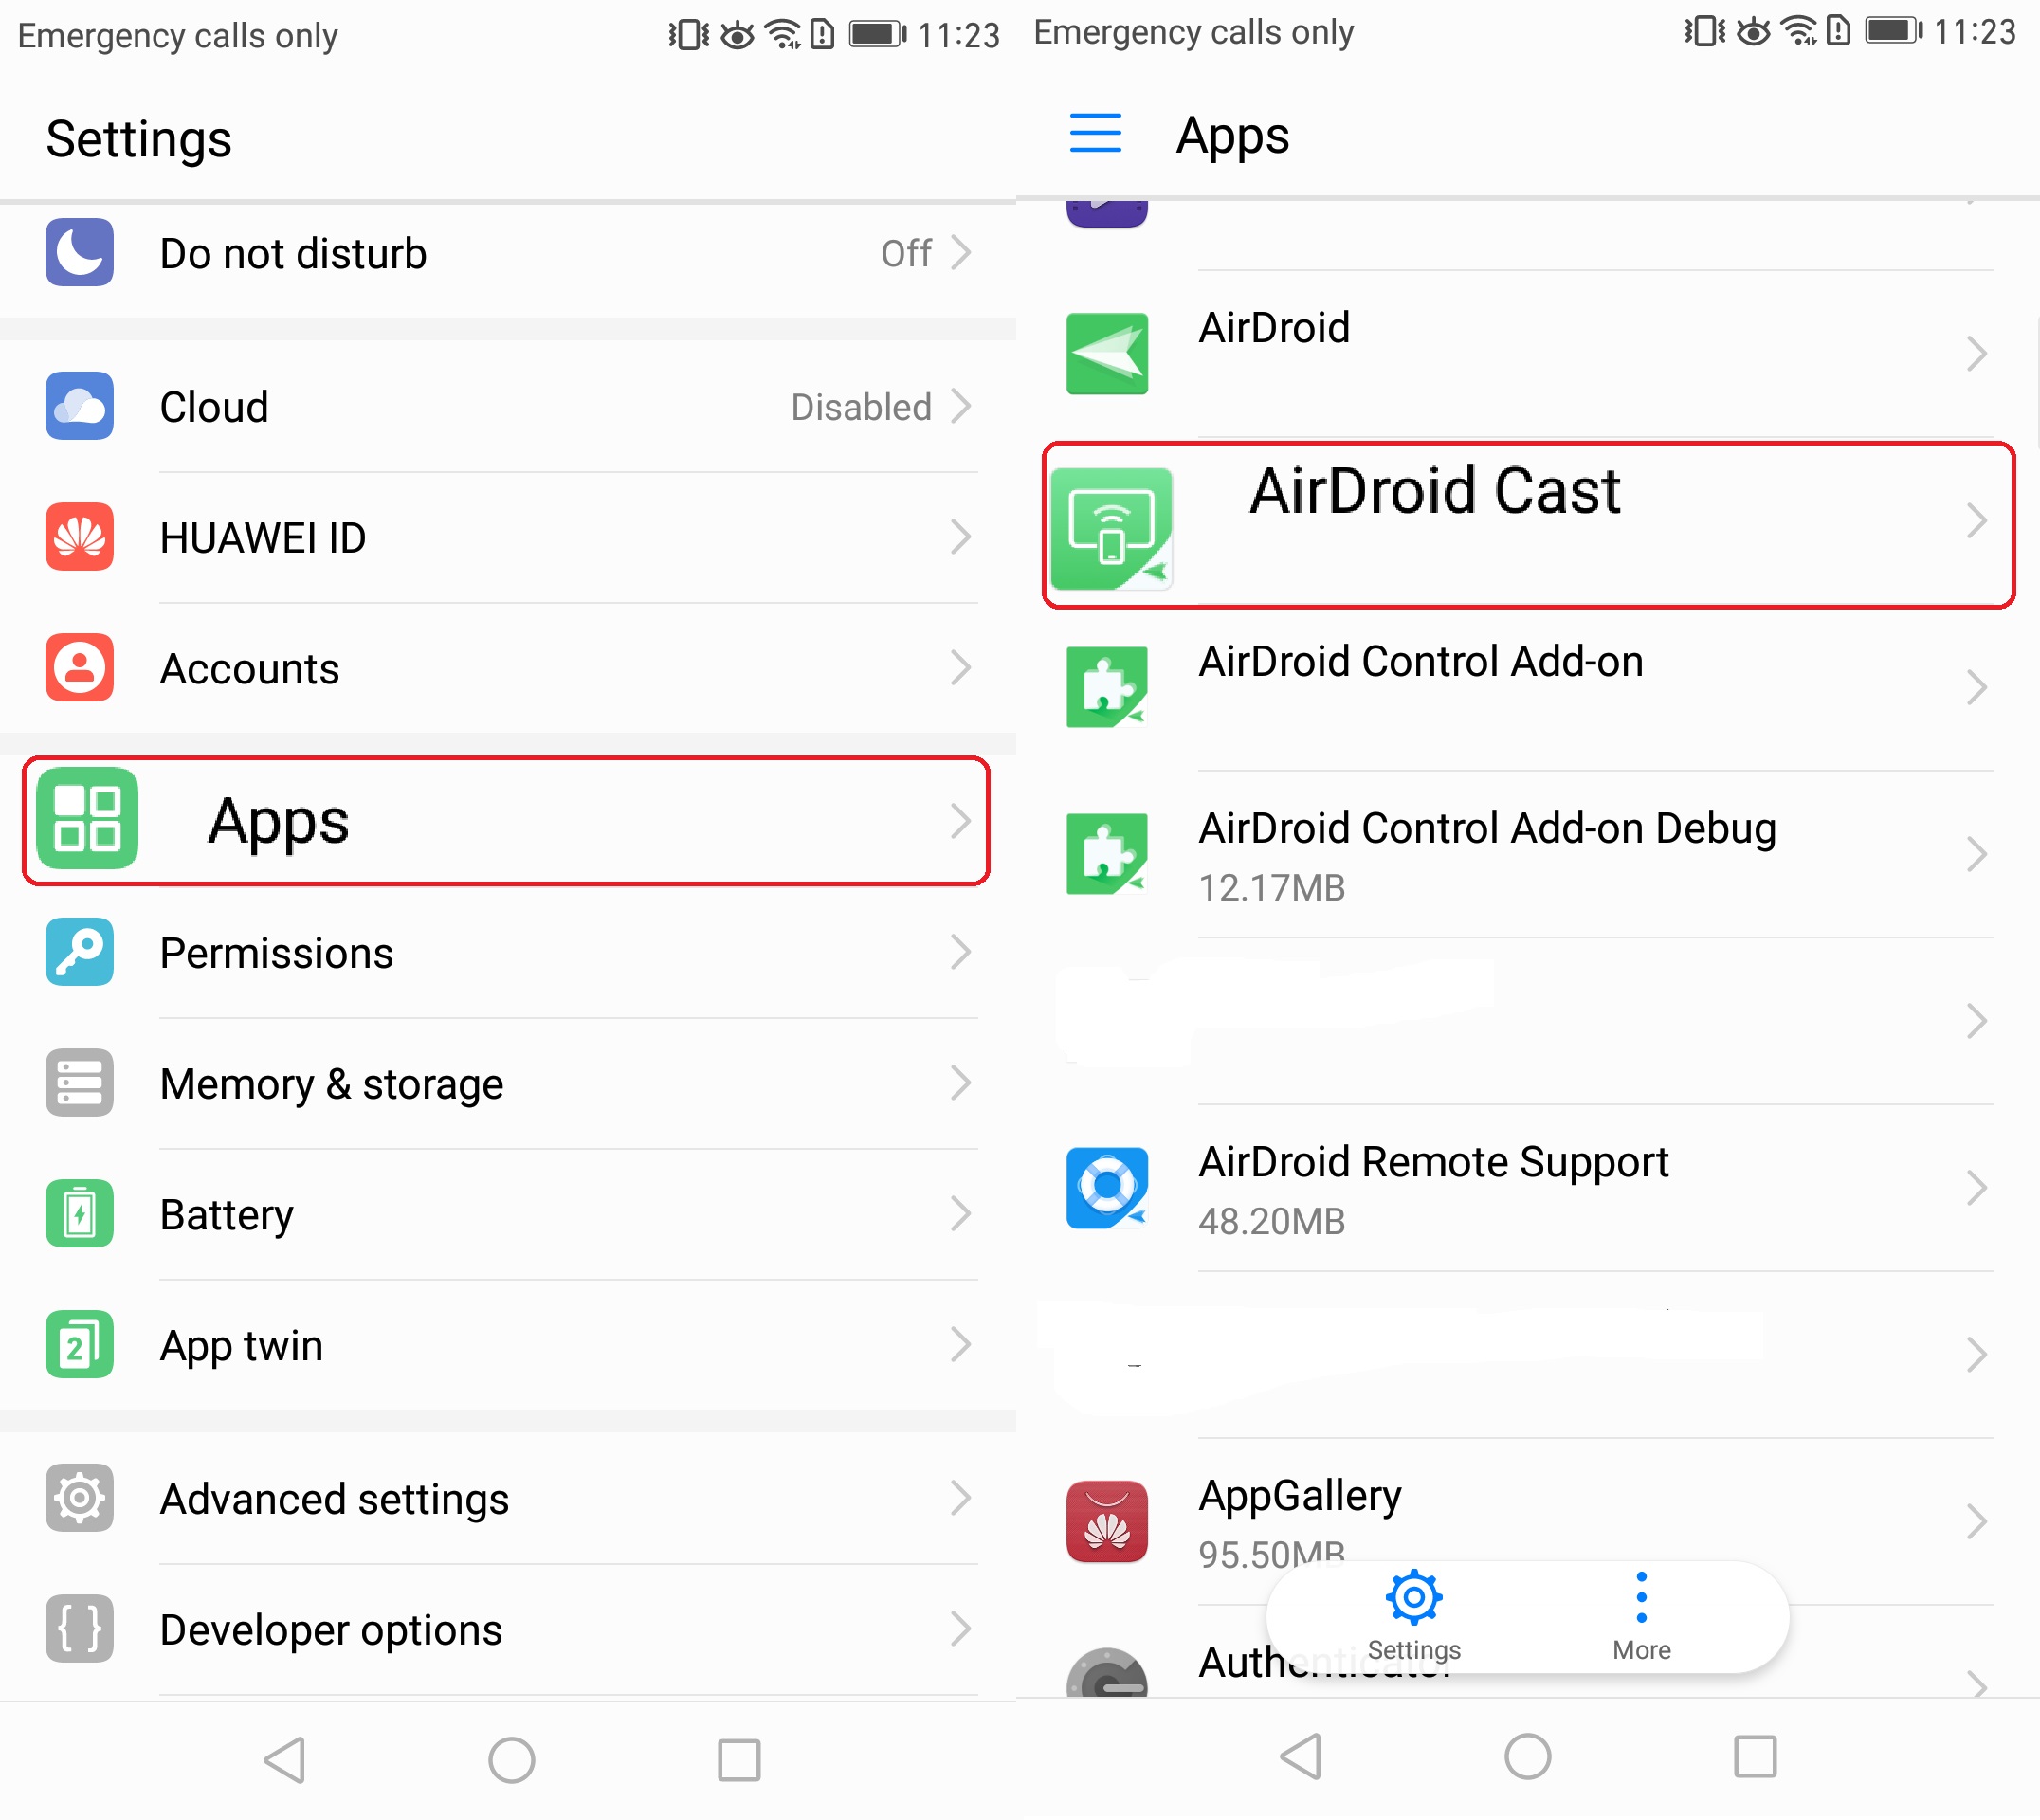 Apps_AirDroid_Cast_-es_-_huawei_Android_7.jpg